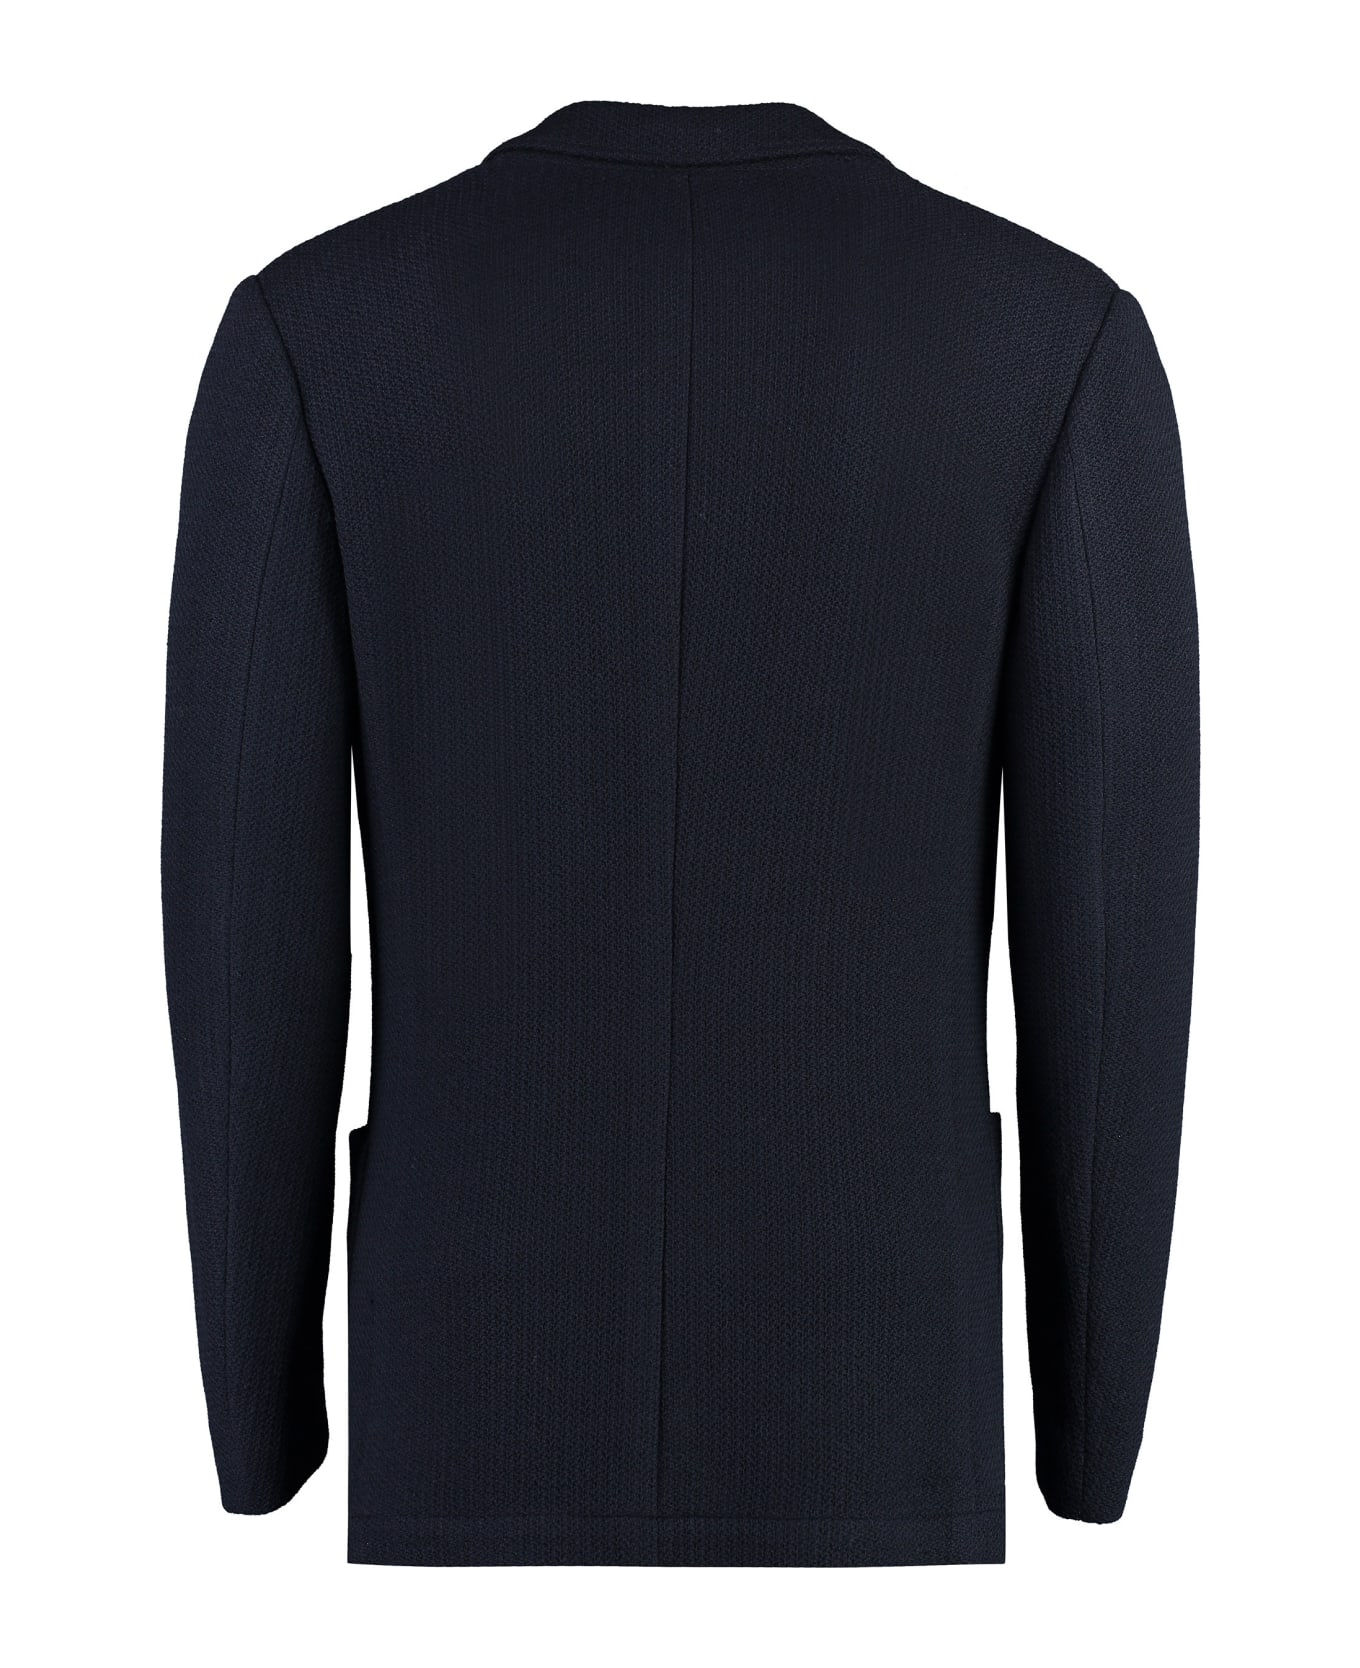 Canali Single-breasted Wool Jacket - blue